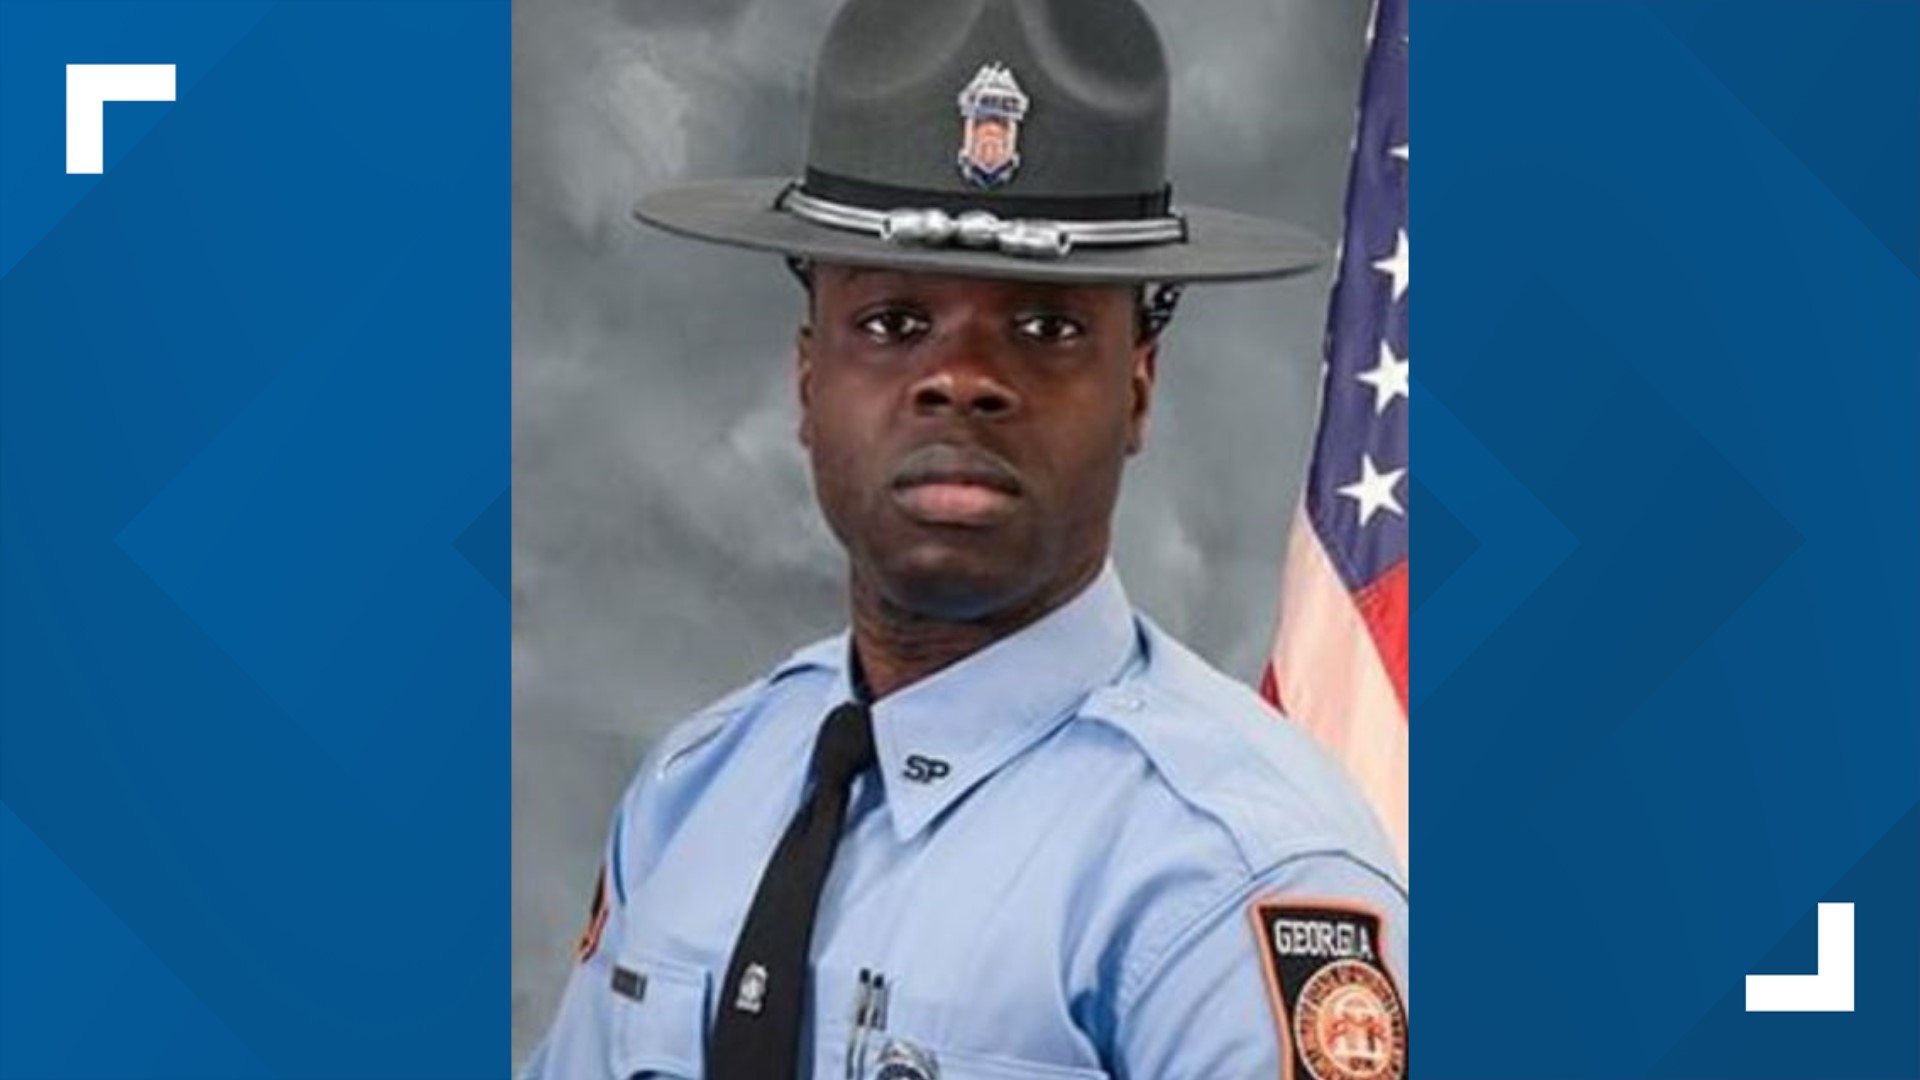 A crash report offers new details into the chase of a motorcycle on I-85 that ended in Trooper Jimmy Cenescar swerving off the road in a deadly wreck on Sunday.